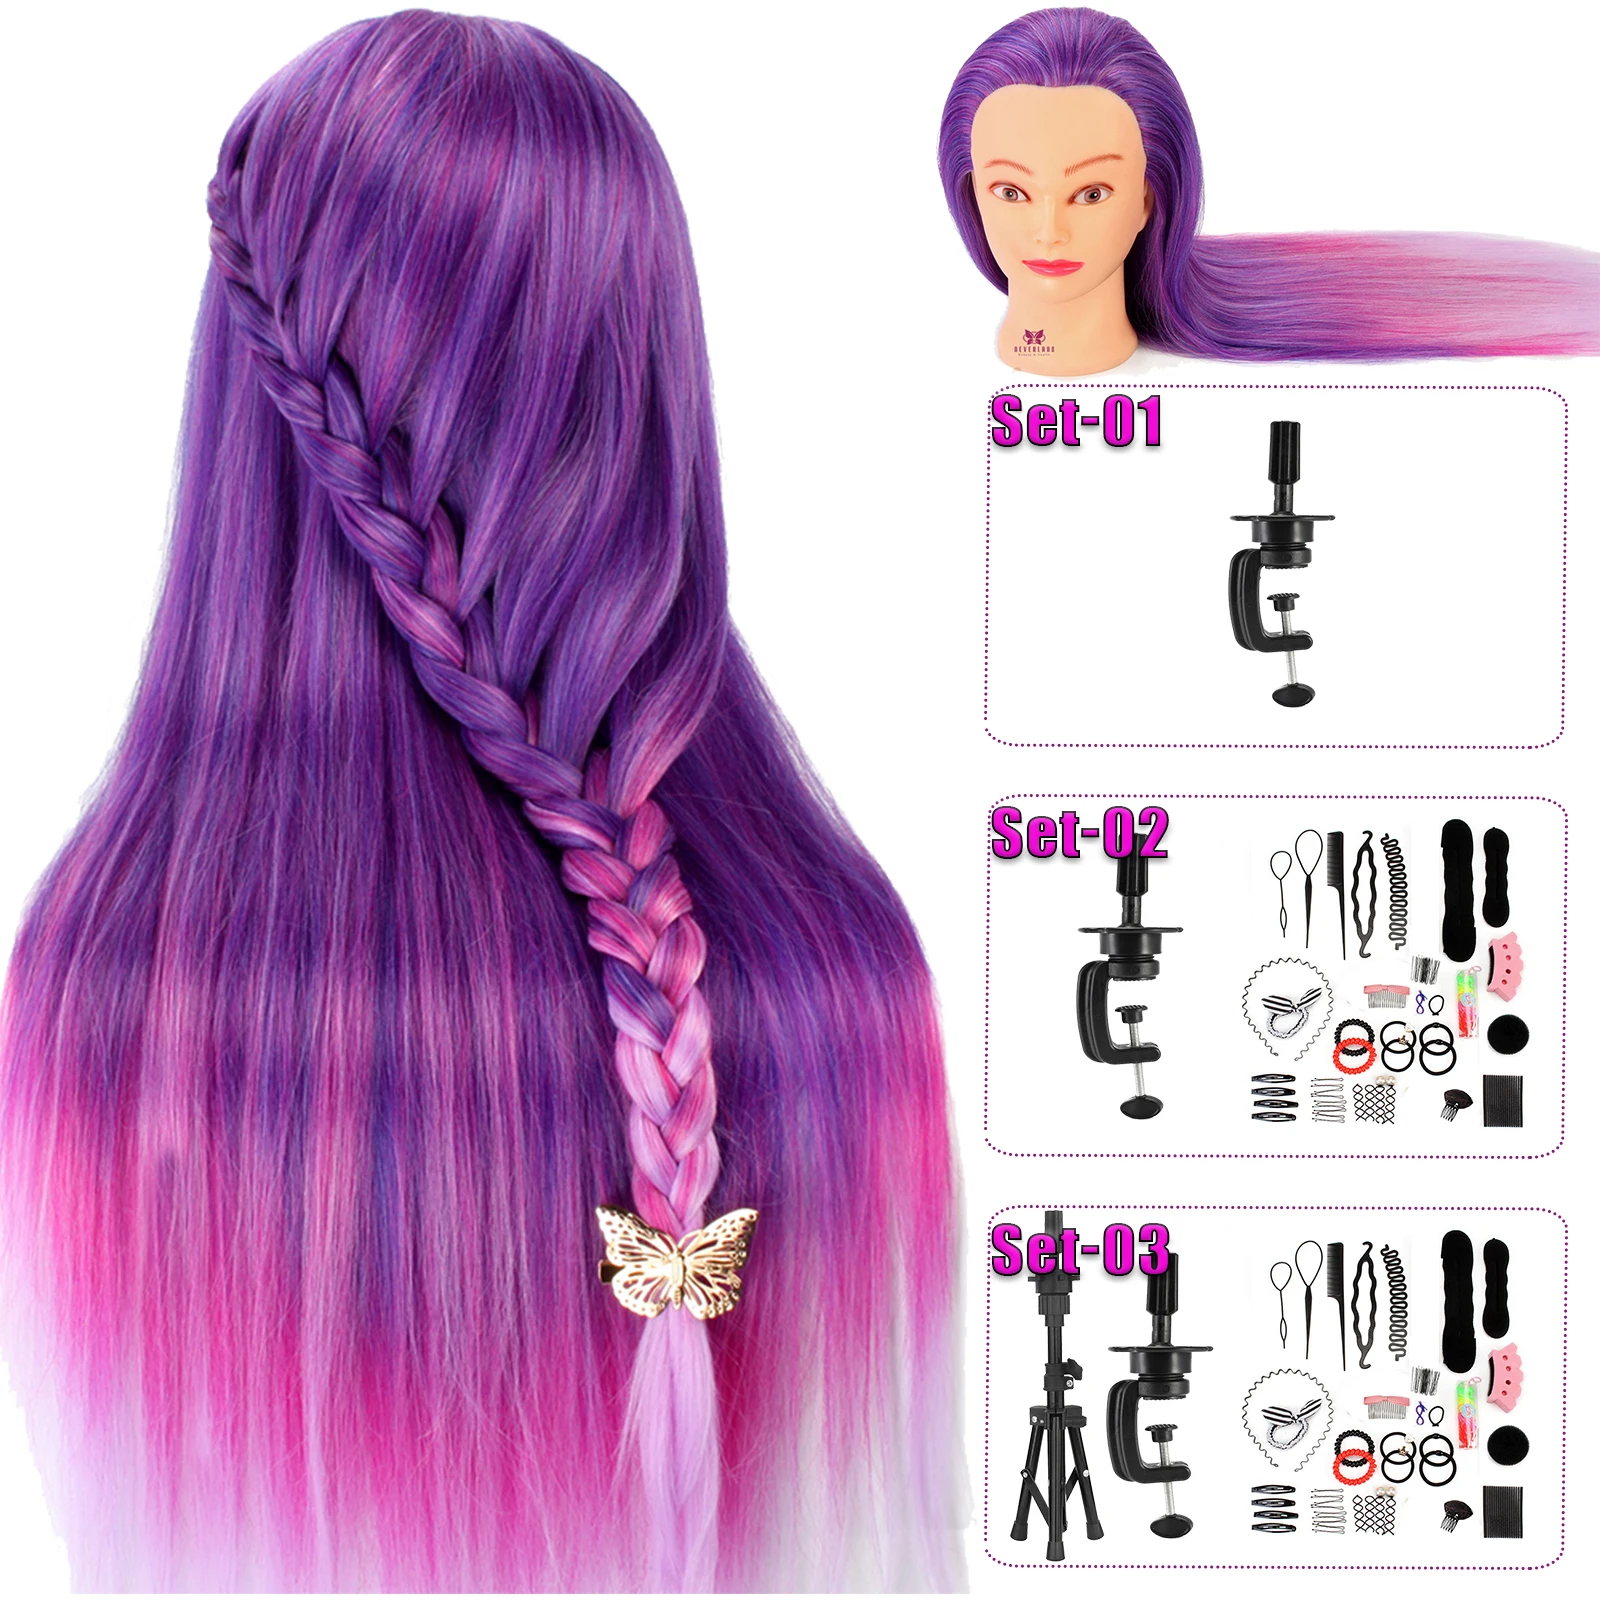 

71cm Purple Rainbow Colorful Long Hair Mannequin Head For Hairstyles Professional Hairdressing Doll Heads Clamp Braid Set Tripod